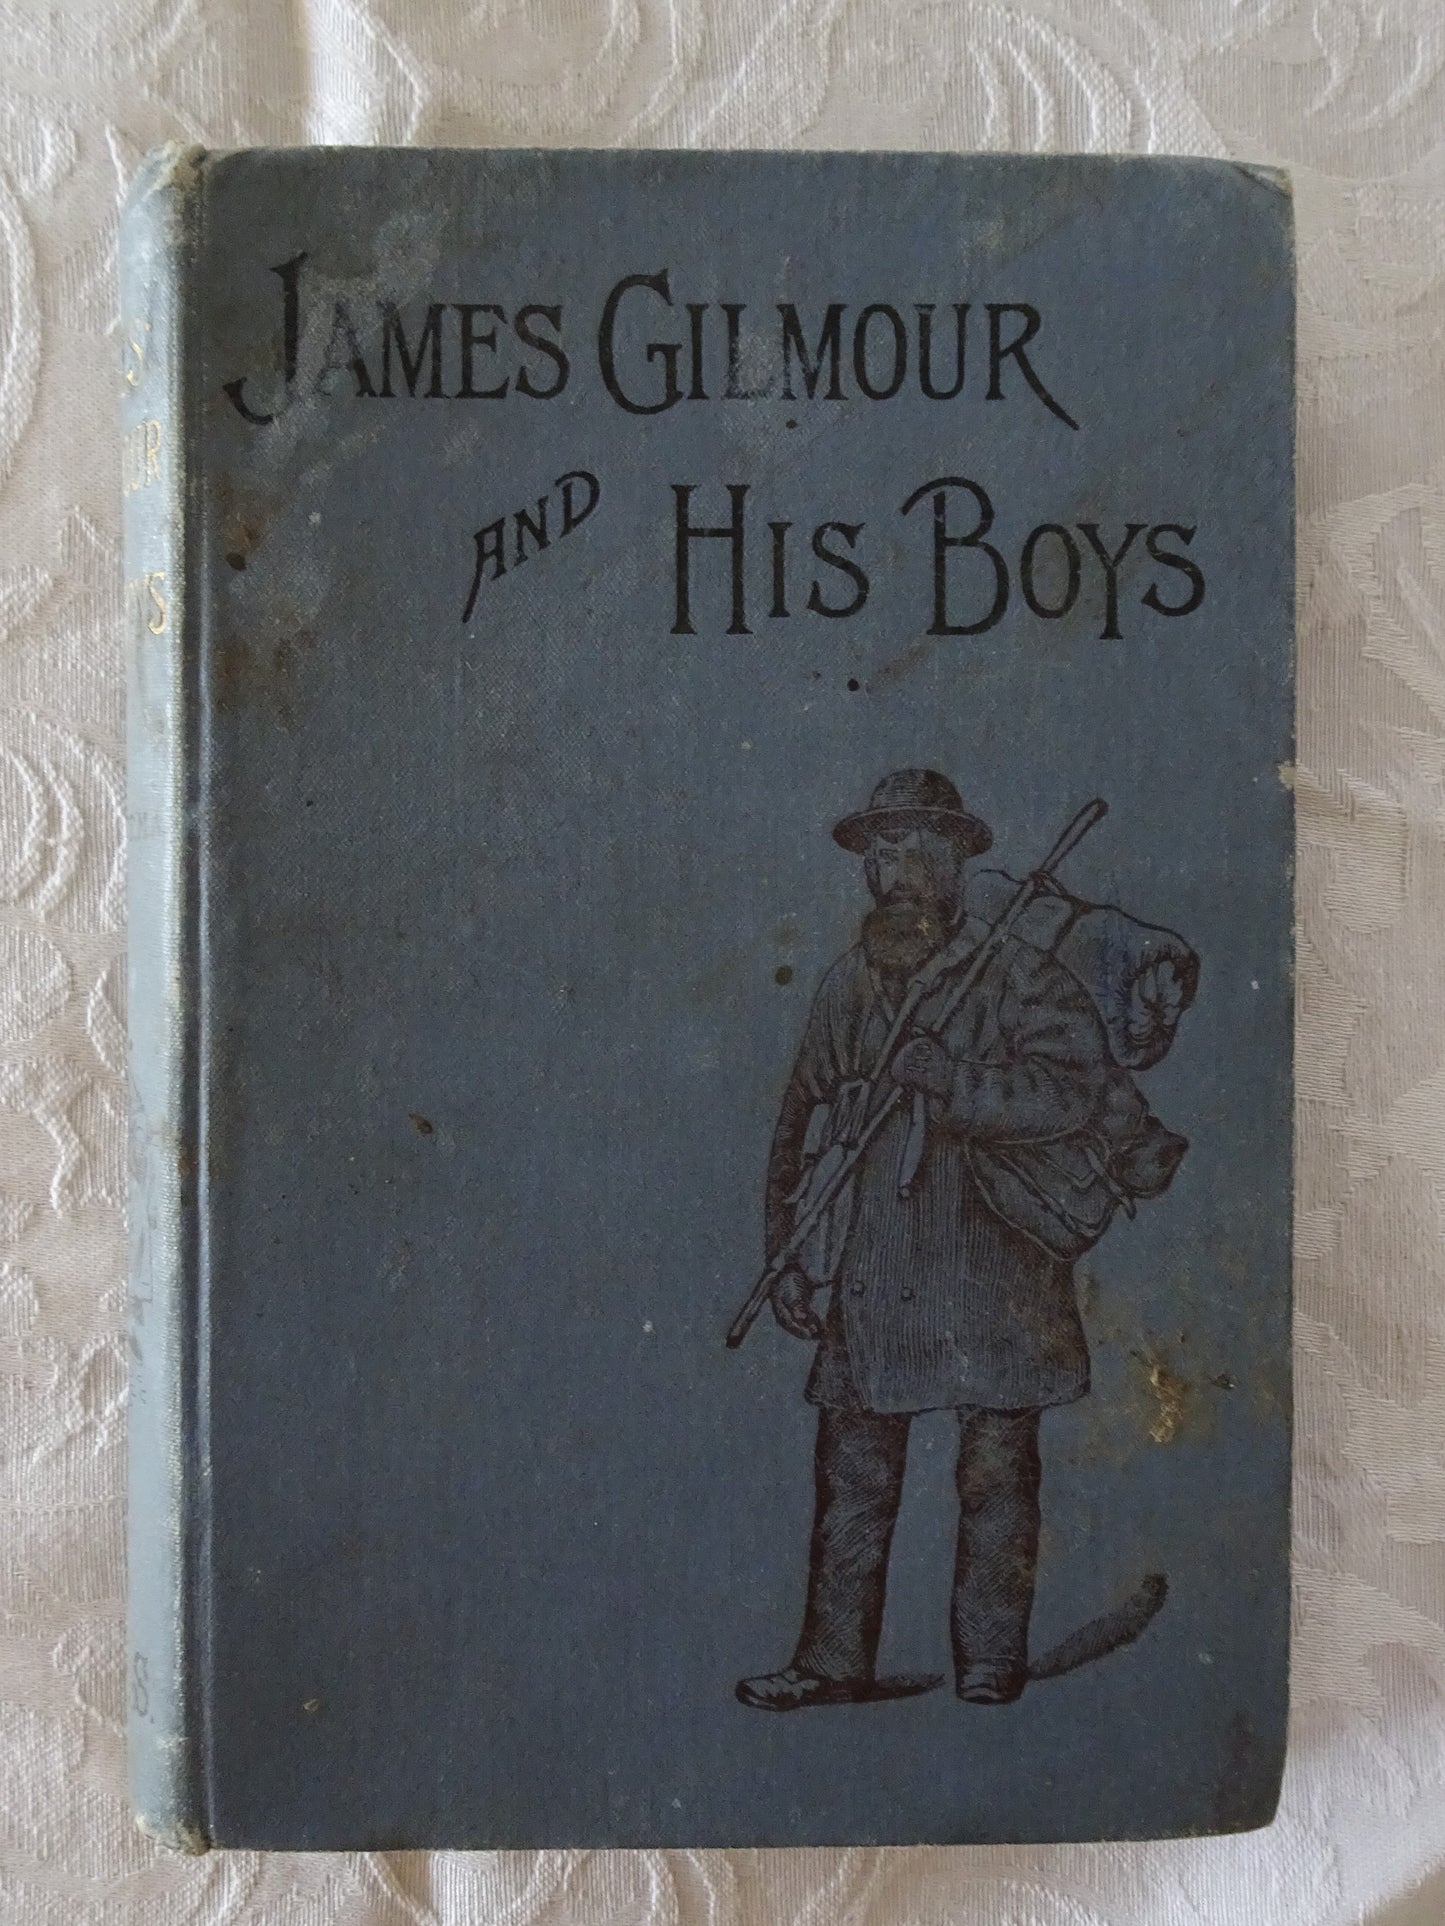 James Gilmour and His Boys  by Richard Lovett